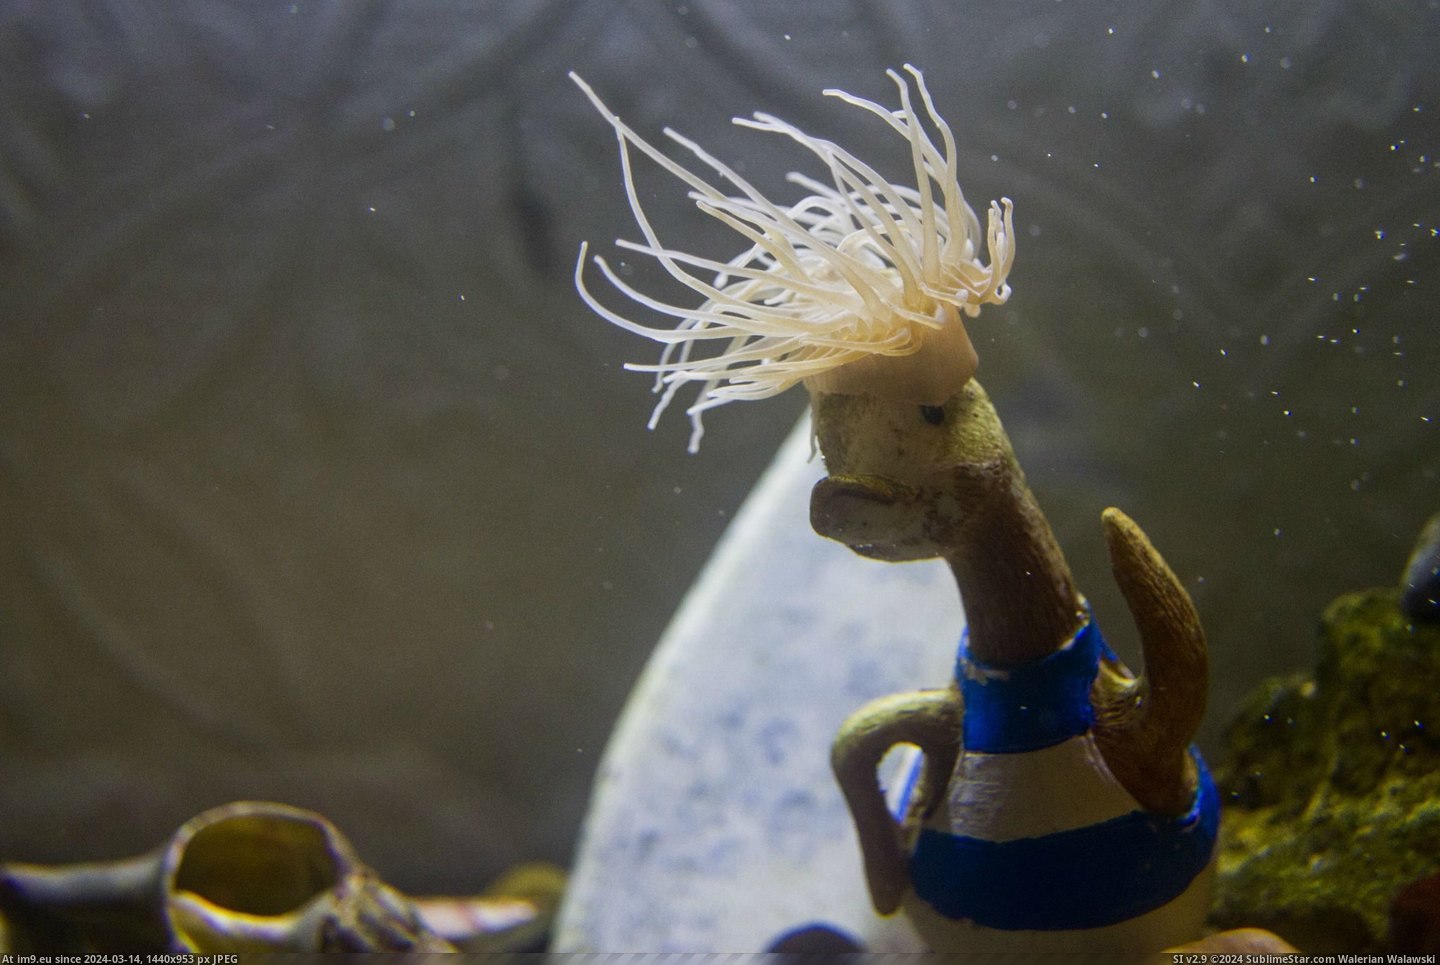 #Beautiful #Head #Decided #Tank #Ornament #Anemone #Latch #Sea #Giving #Duck [Pics] My snakelock anemone has decided to latch onto the head of the sassy duck ornament in my sea tank, giving it beautiful lo Pic. (Image of album My r/PICS favs))